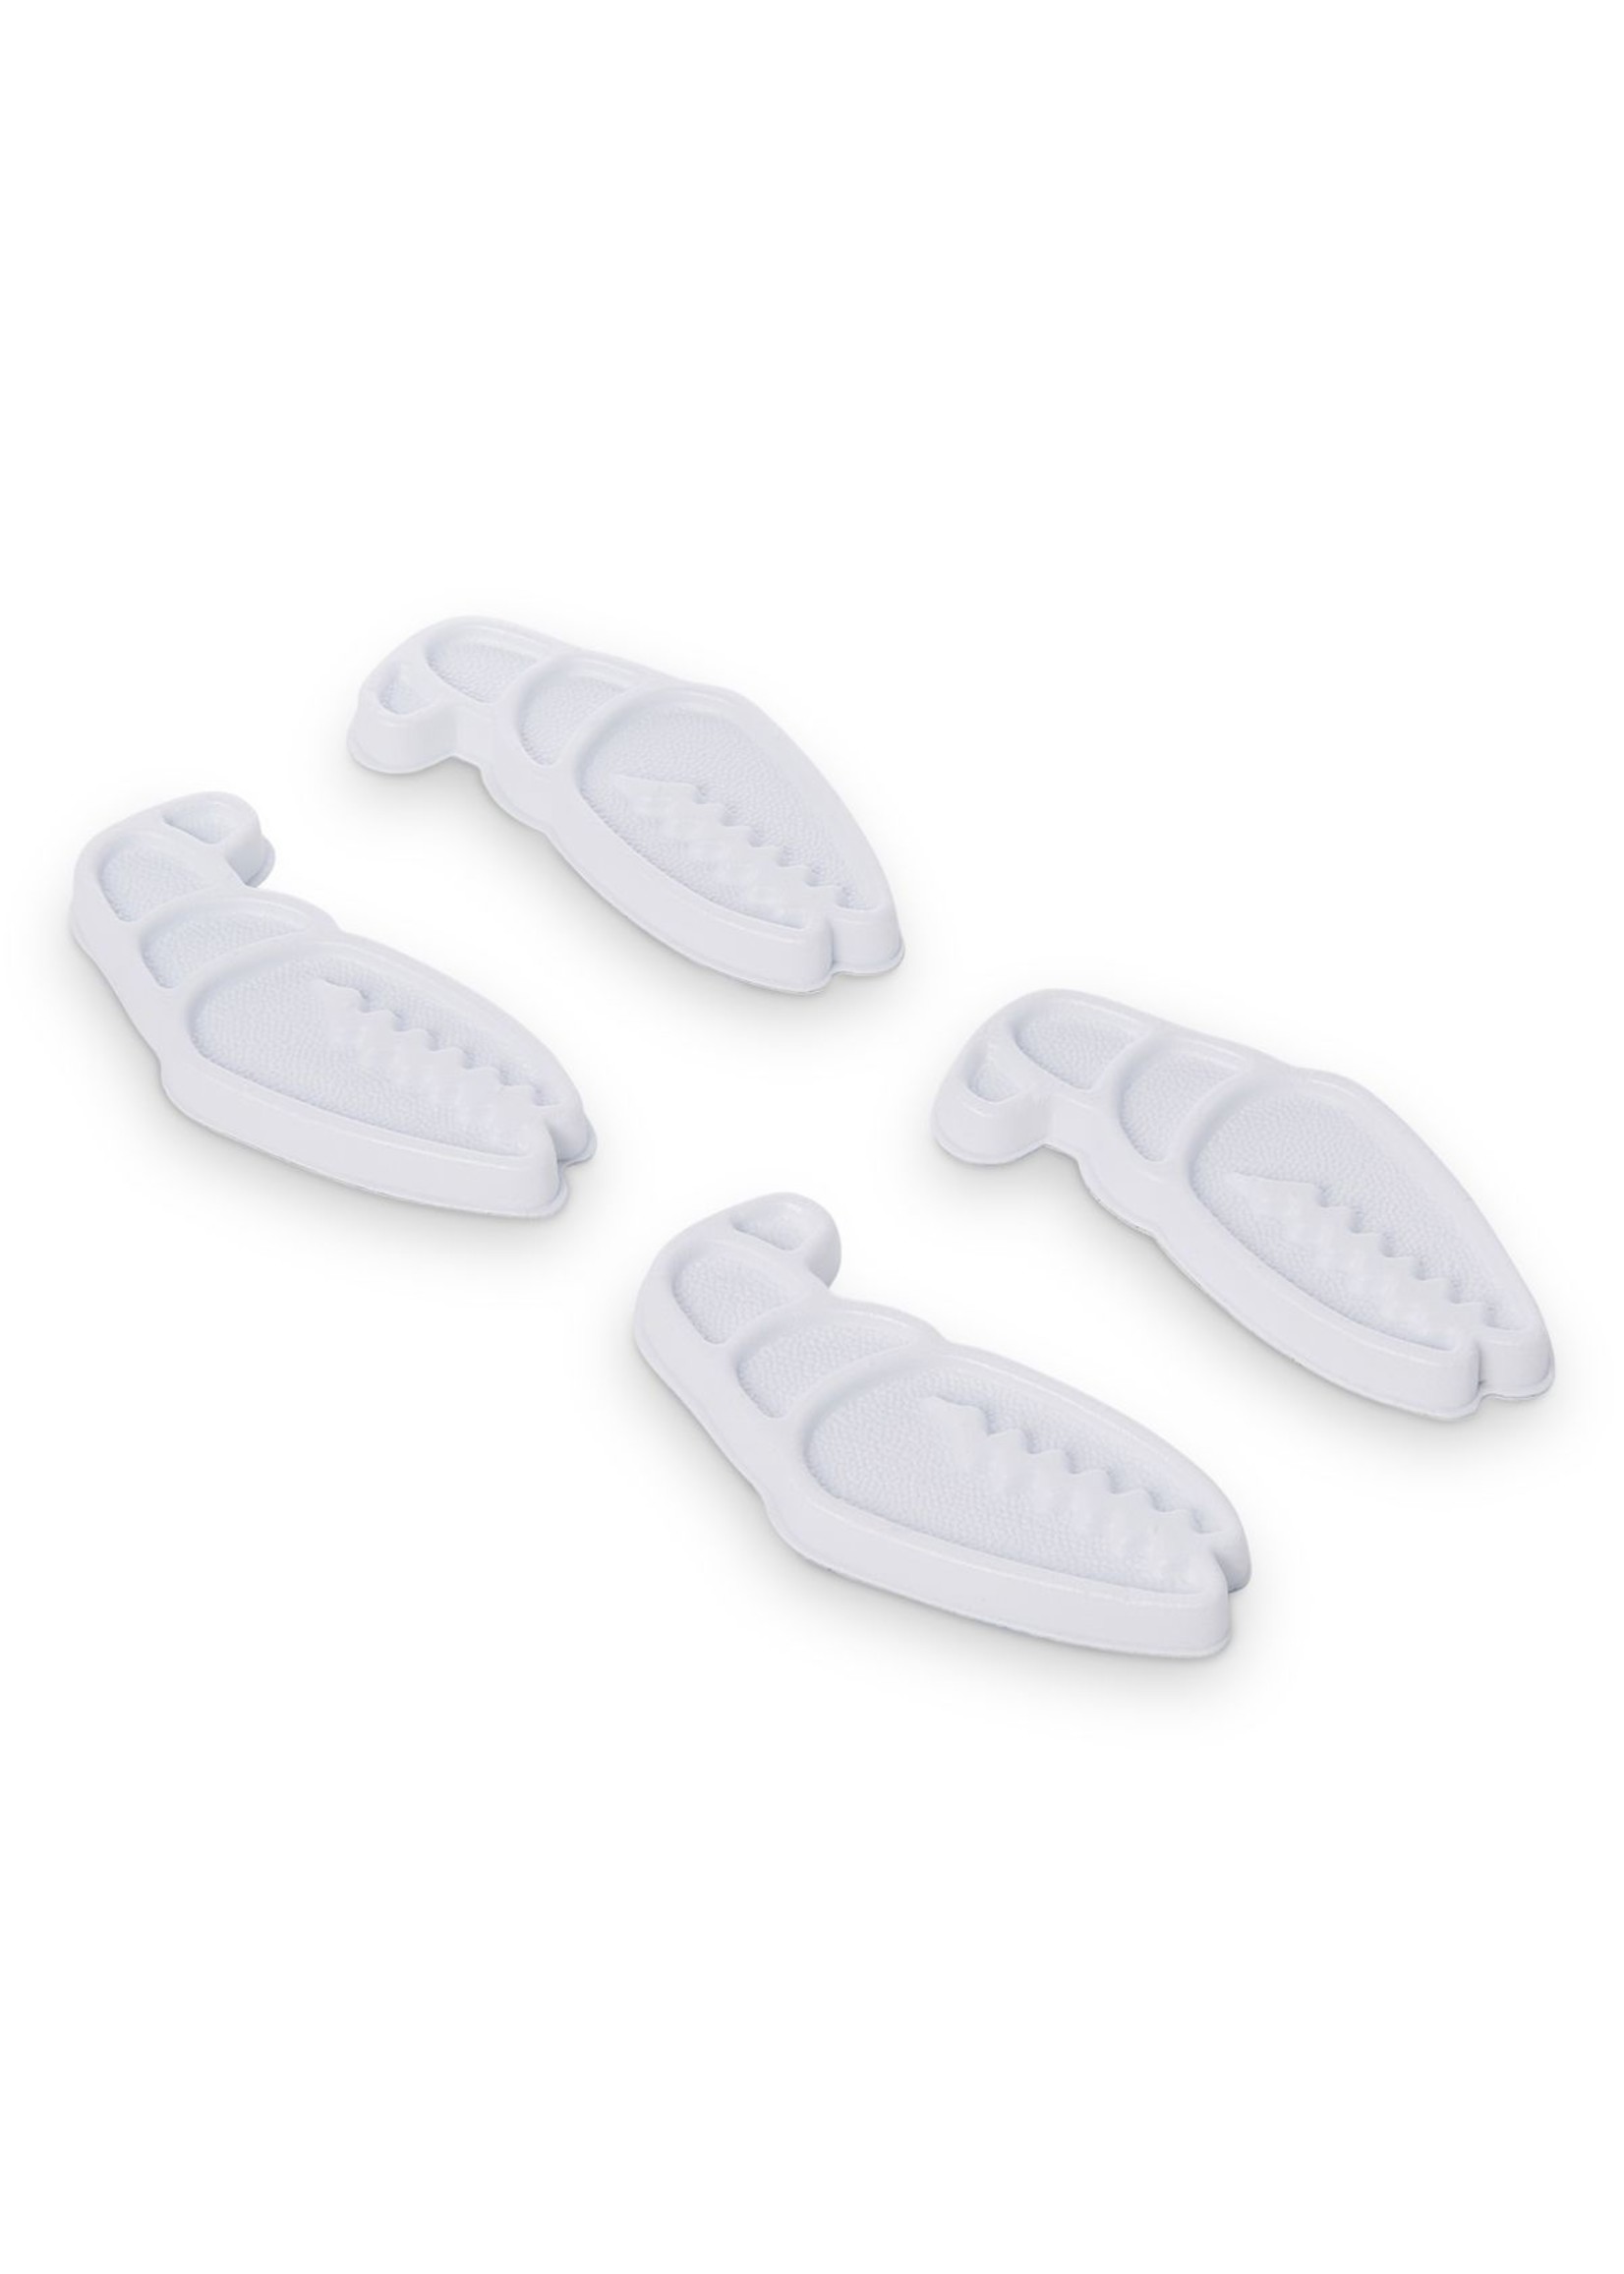 Crab Grab Traction Pad Mini Claws White